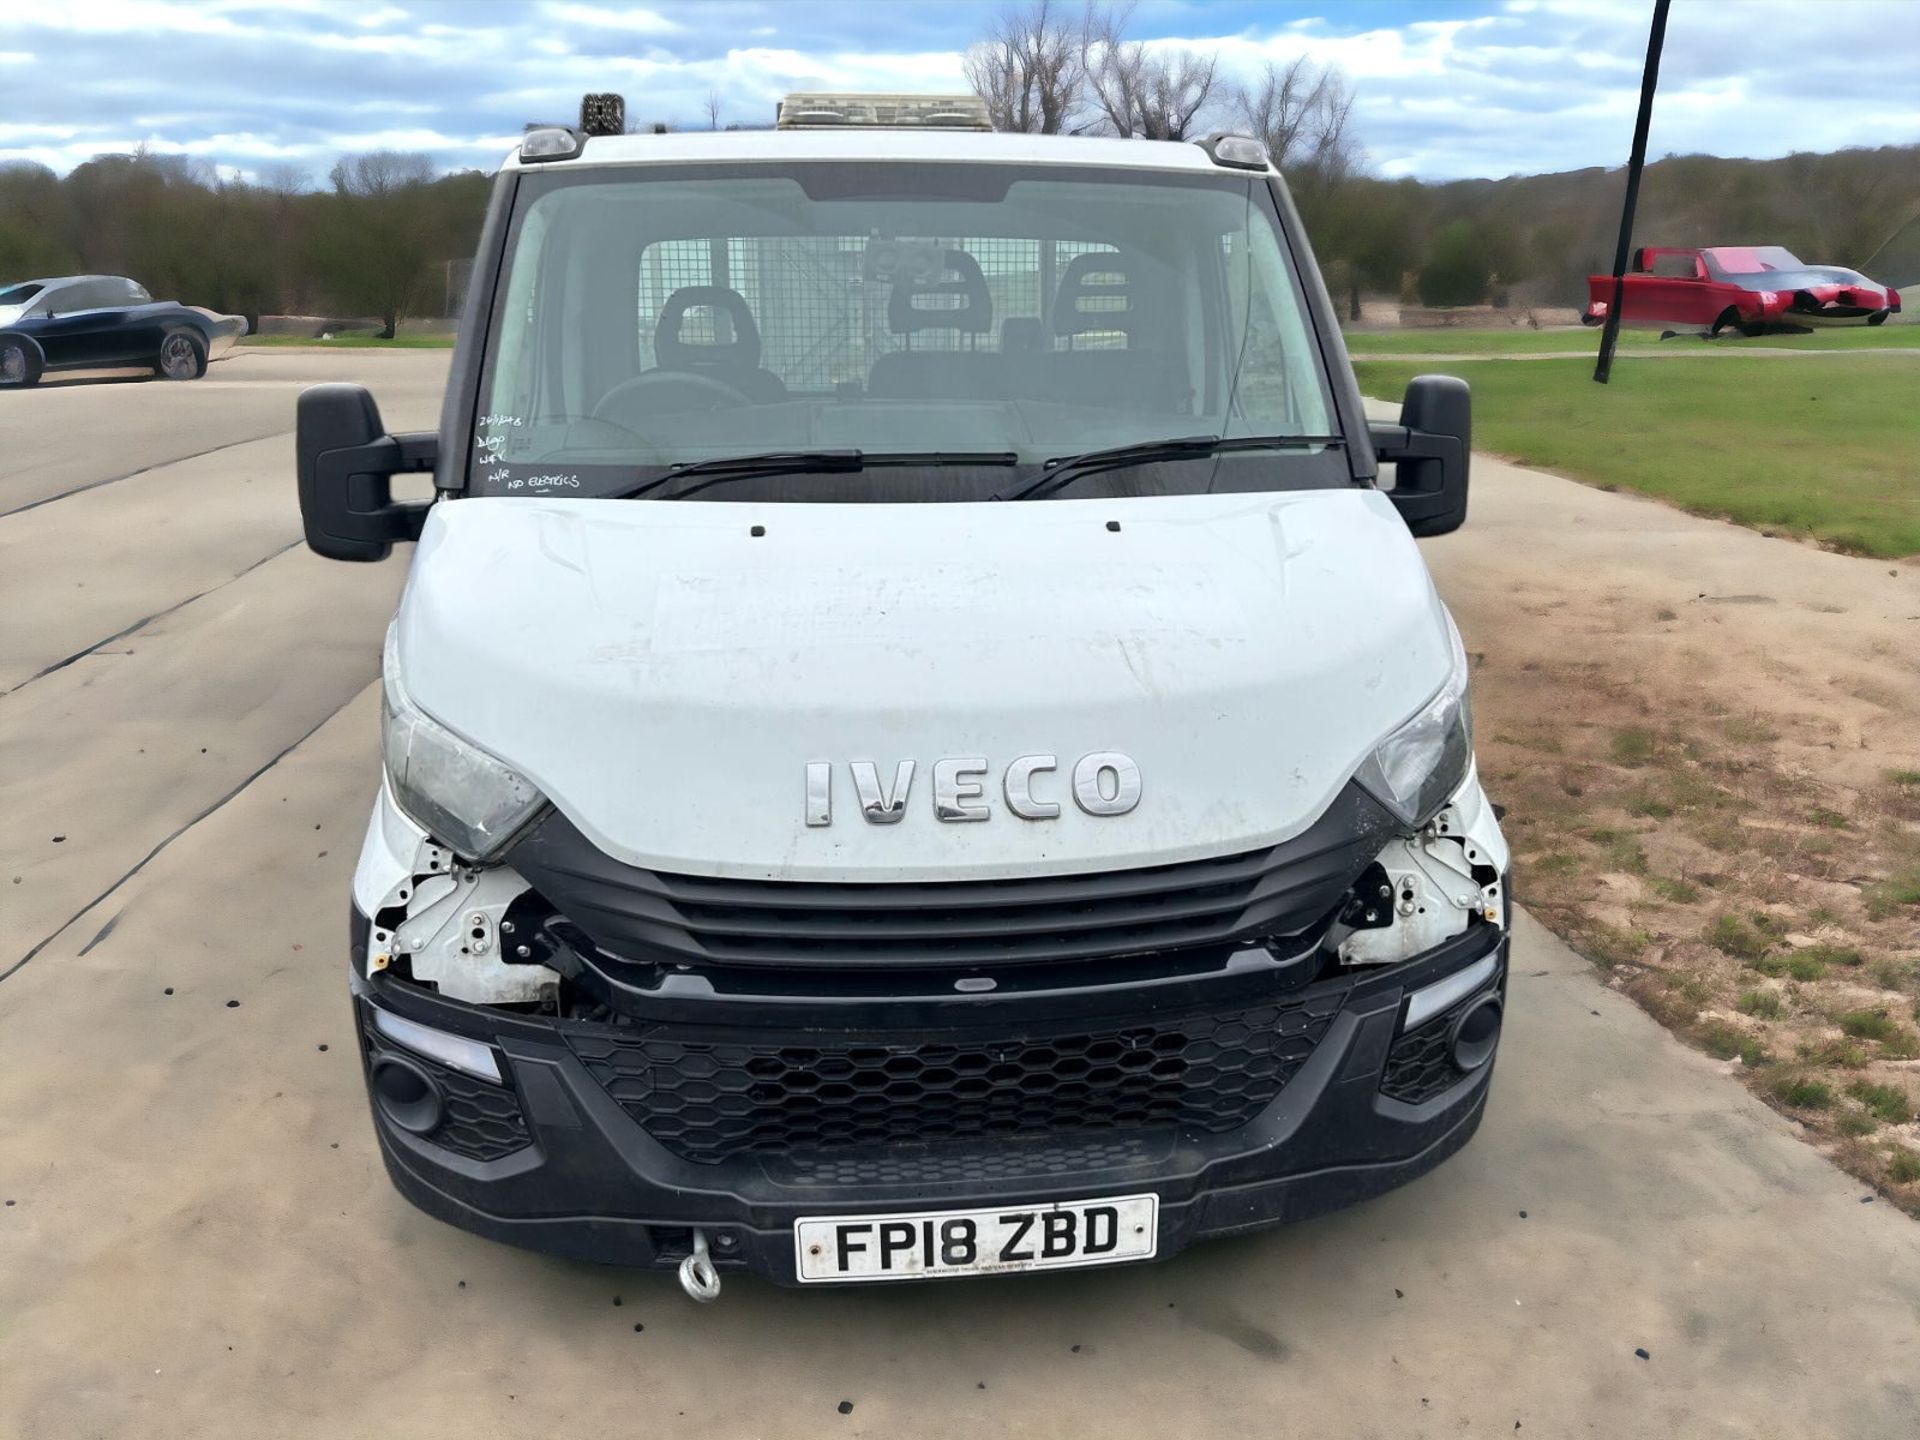 2018-18 REG IVECO DAILY DROPSIDE HI MATIC HPI CLEAR - Image 2 of 8